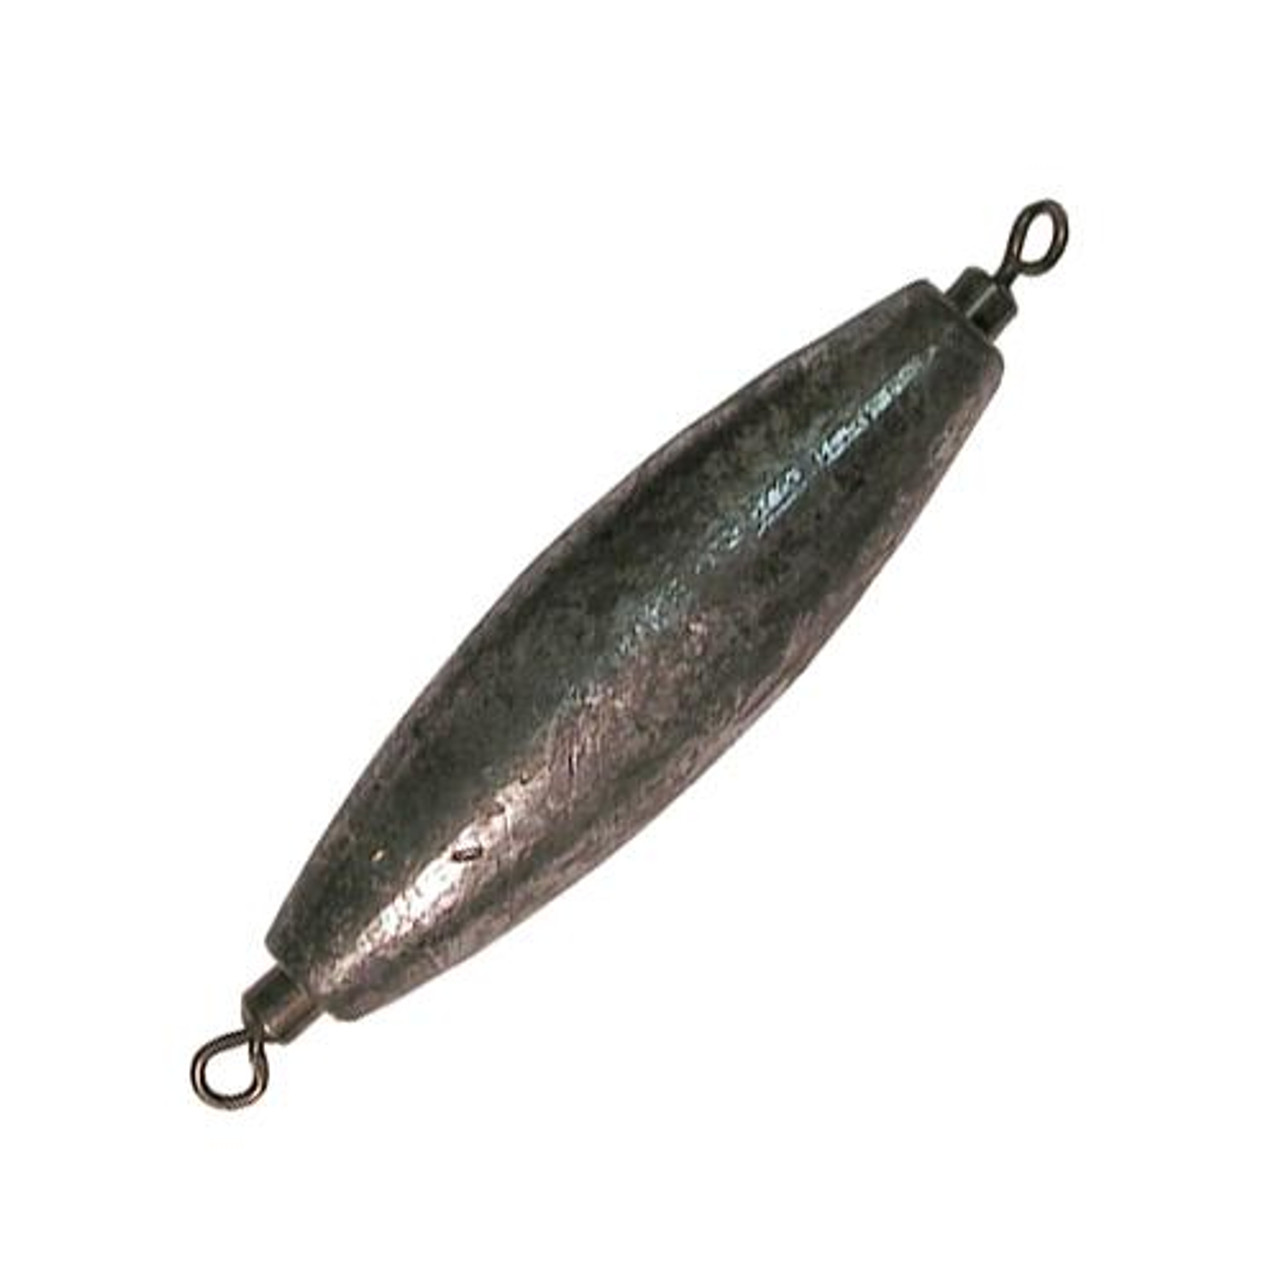 Eagle Claw Green Fishing Lures